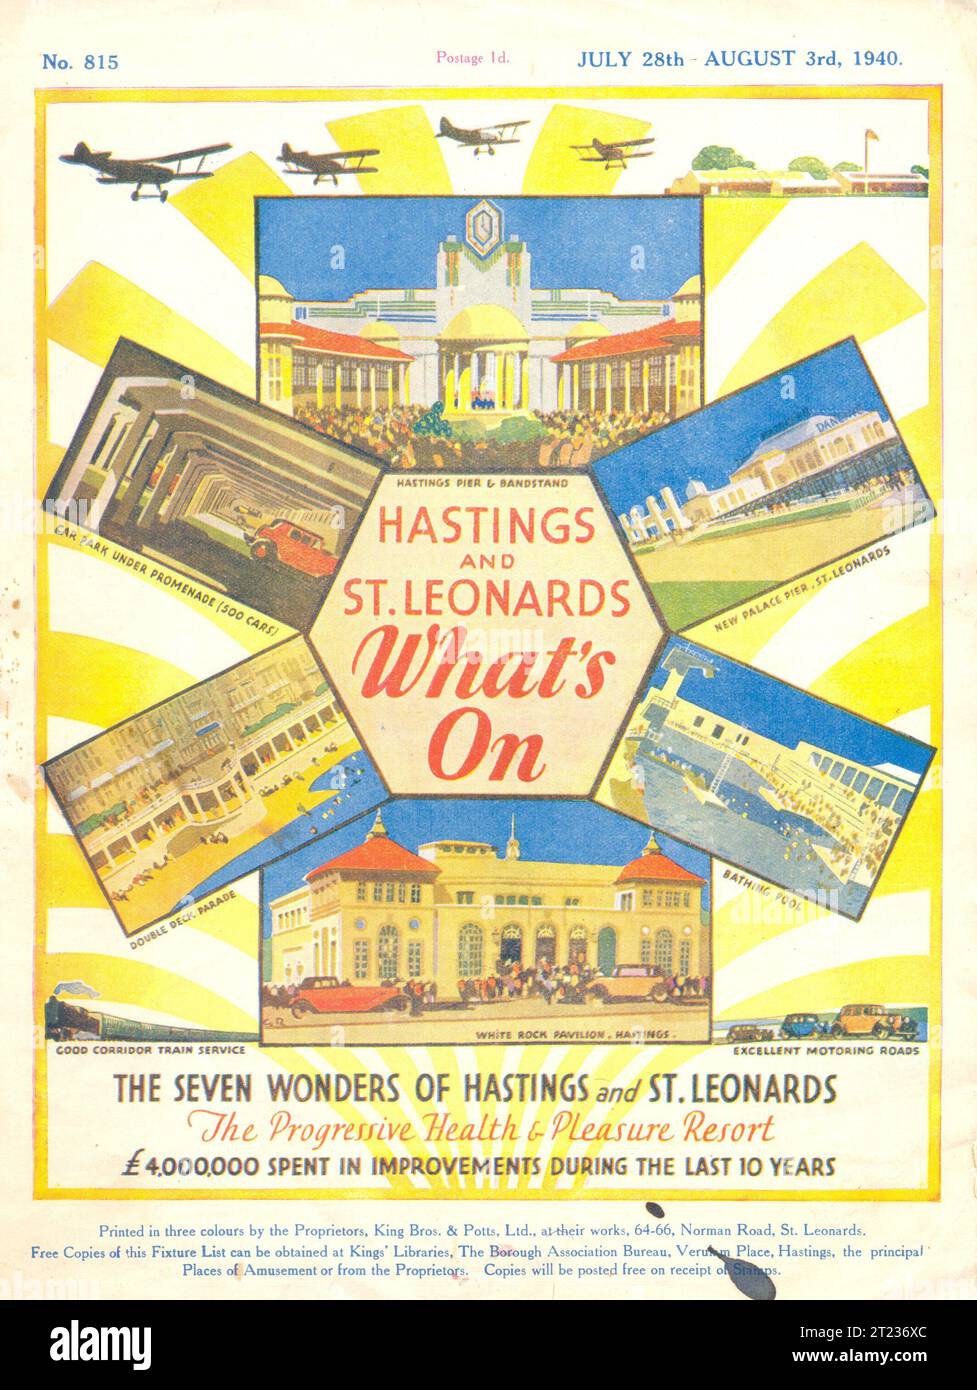 No 815 of Hastings & St Leonard's What's On for 28 July to 3rd August 1940 illustrating the Seven Wonders of Hastings and St Leonards Stock Photo